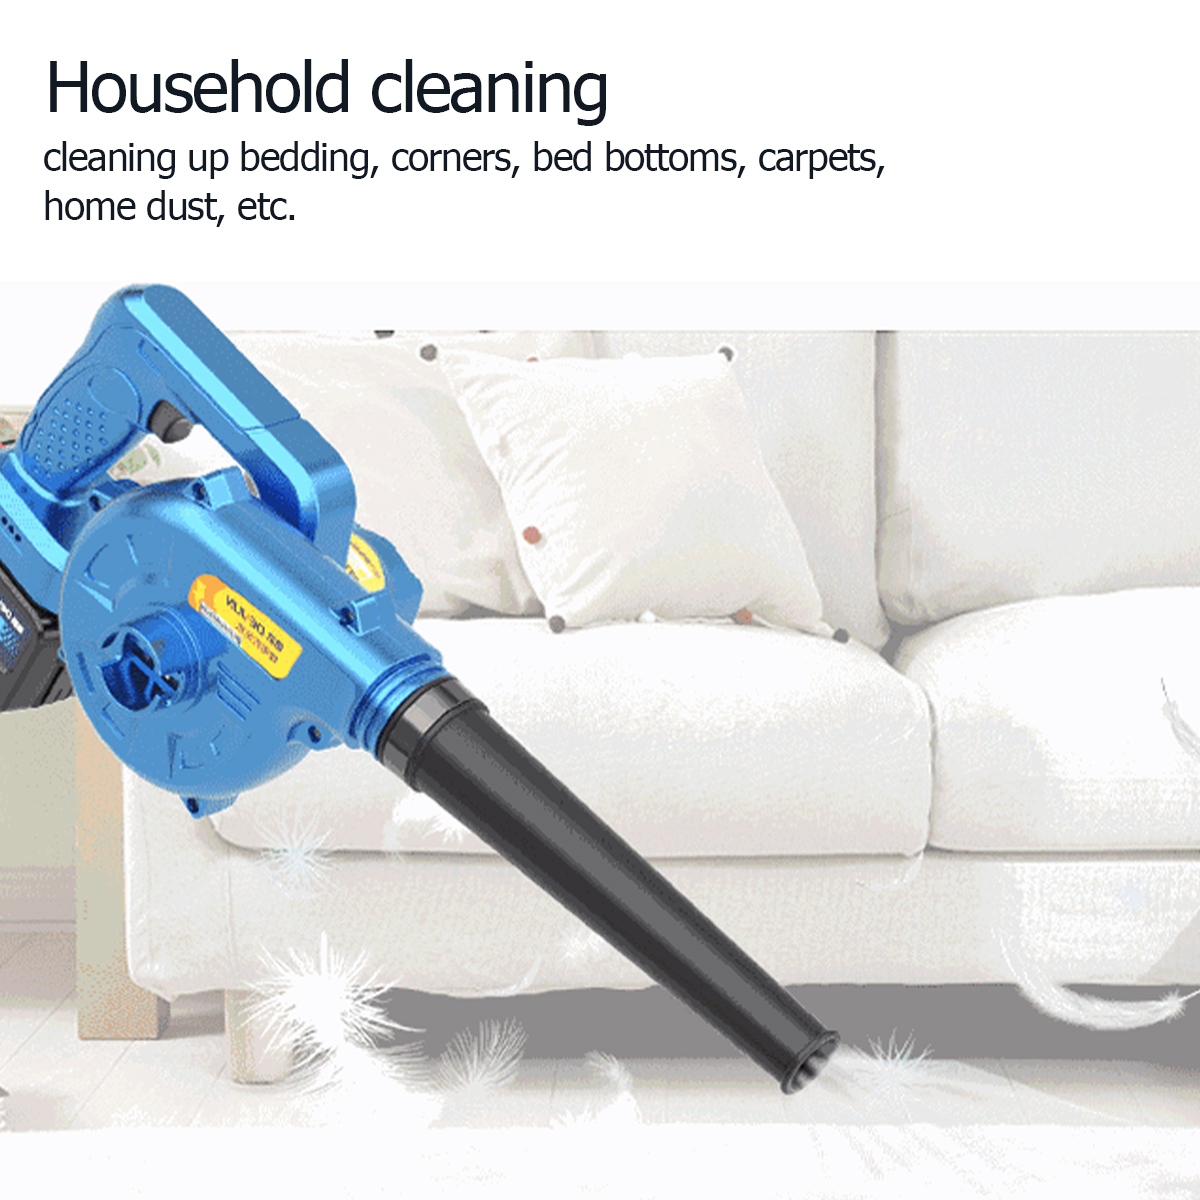 Cordless-Electric-Air-Blower-Handheld-Blowing-Rechargeable-Cleaning-Dust-Machine-1605626-7